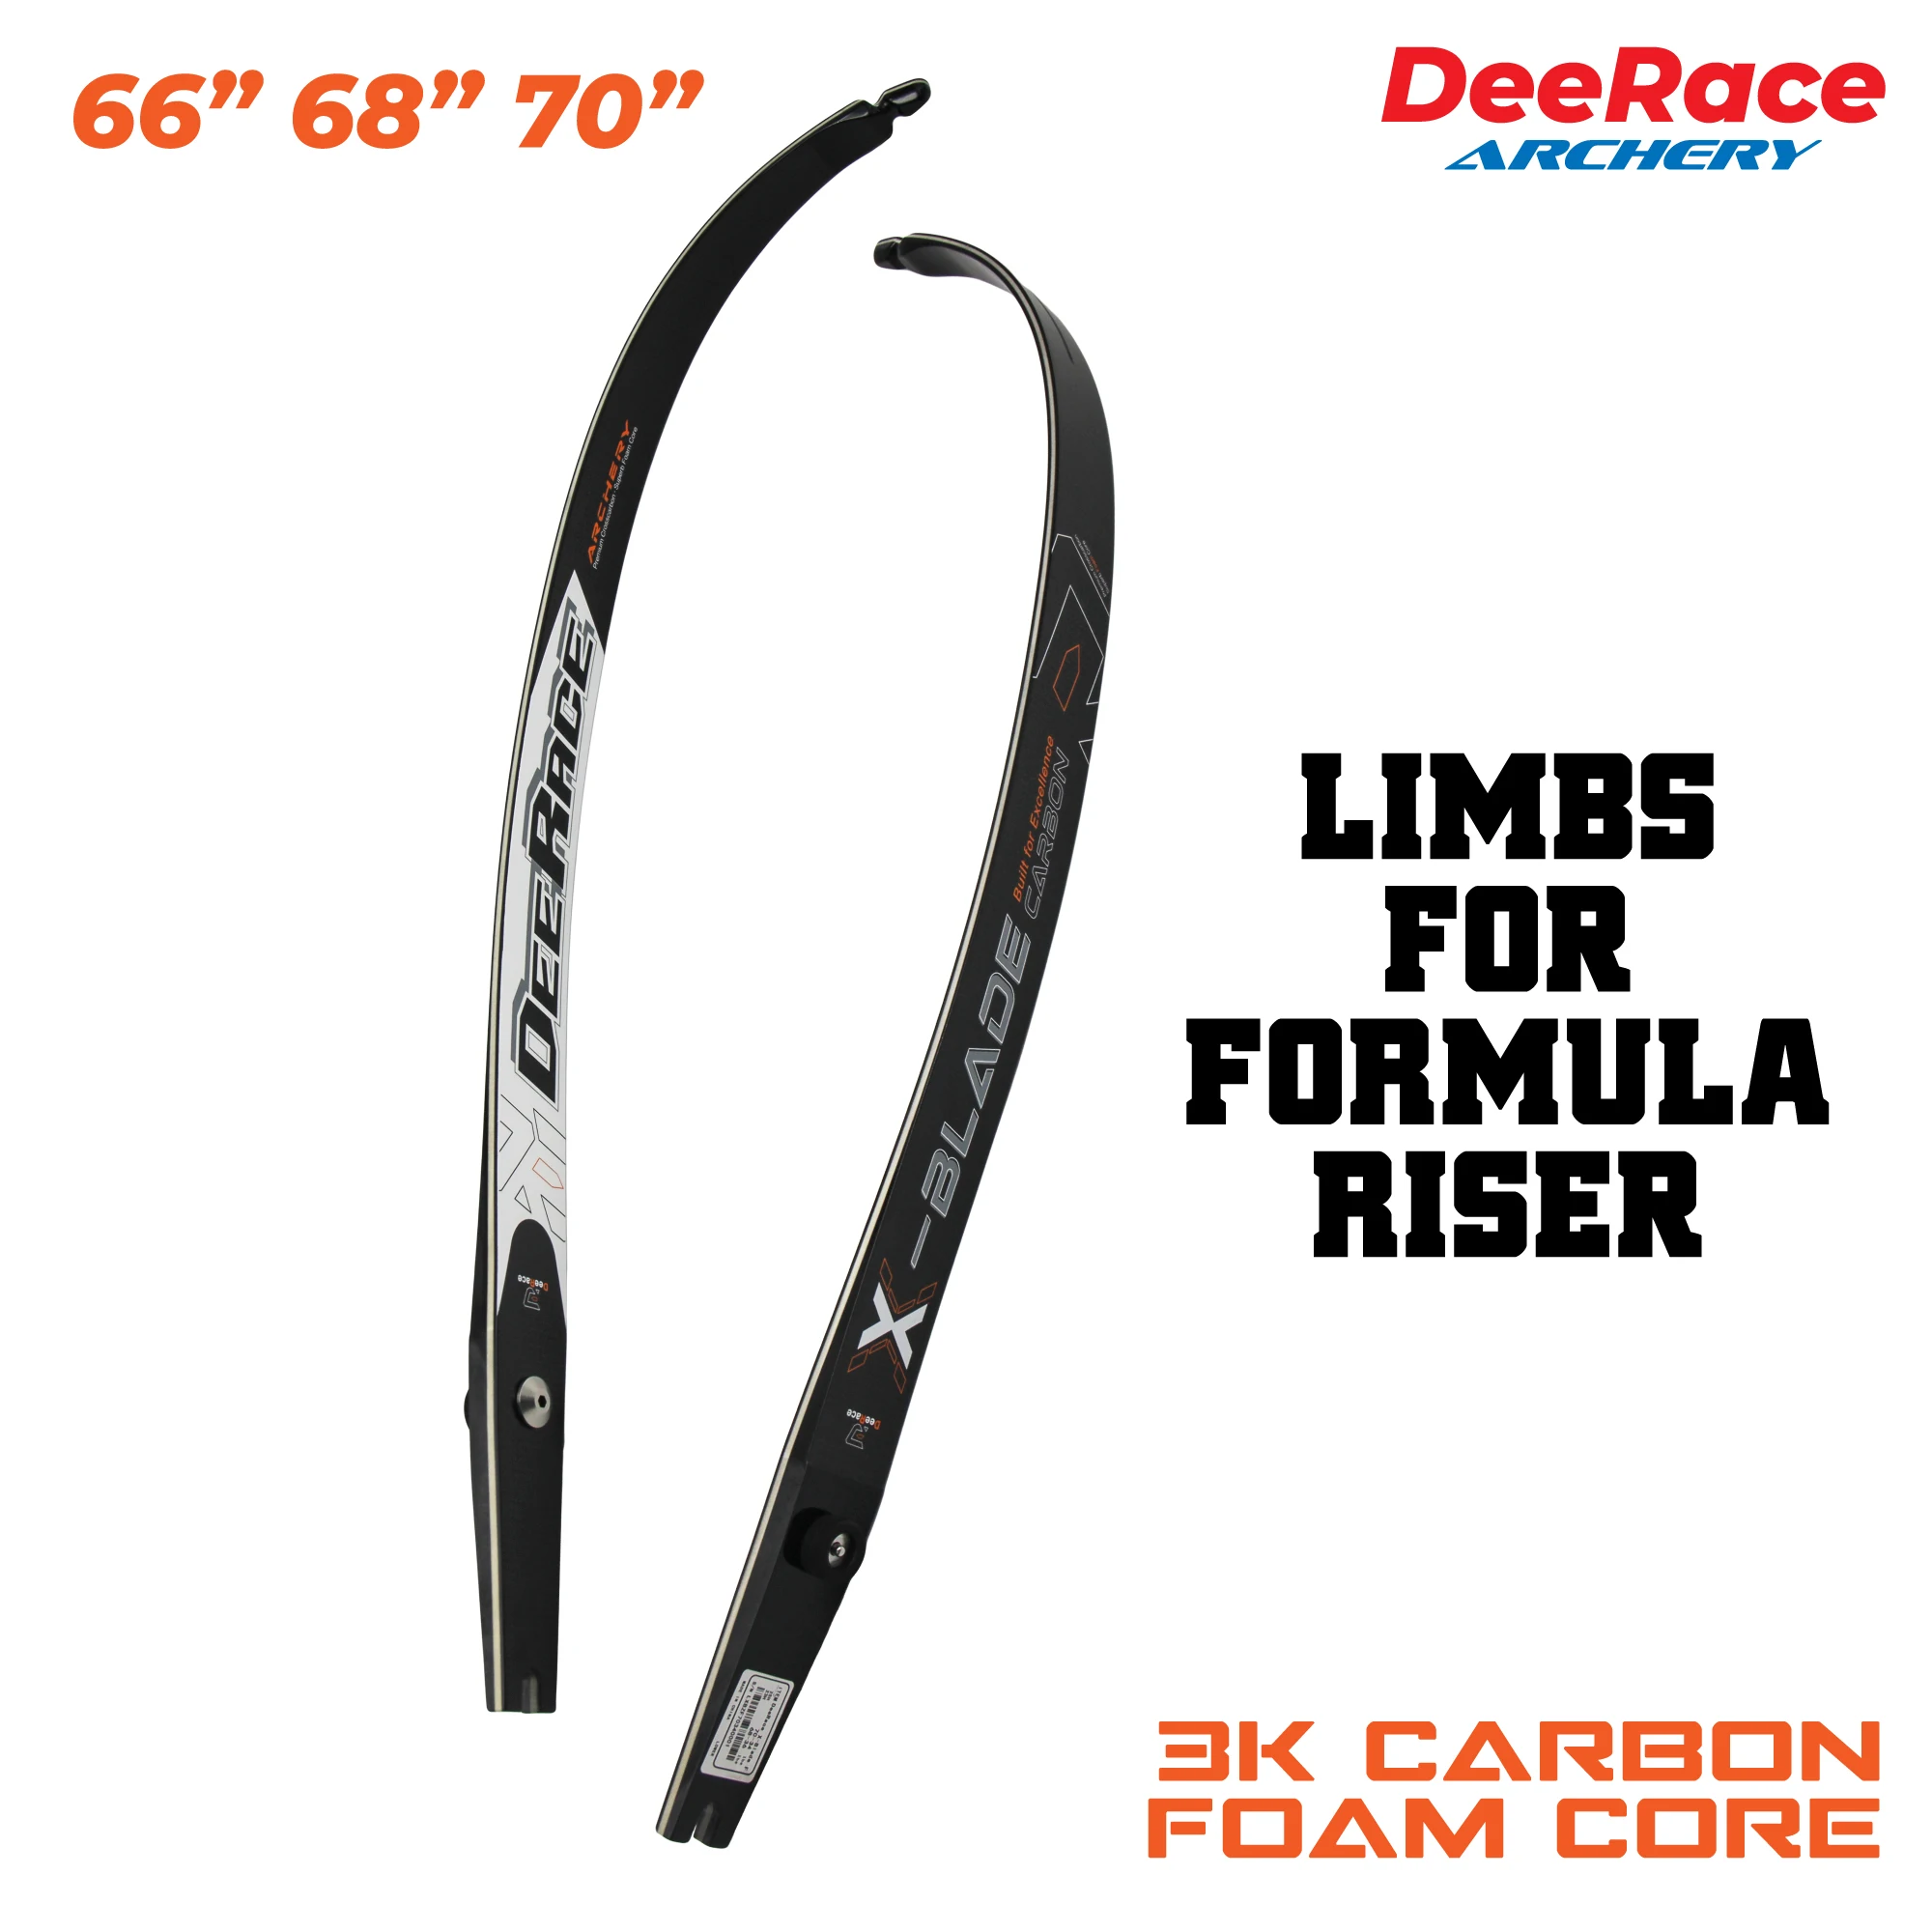 【Limbs For Formula Riser】Recurve Bow Limbs With 3K Carbon Foam Core Use to Hoyt 66